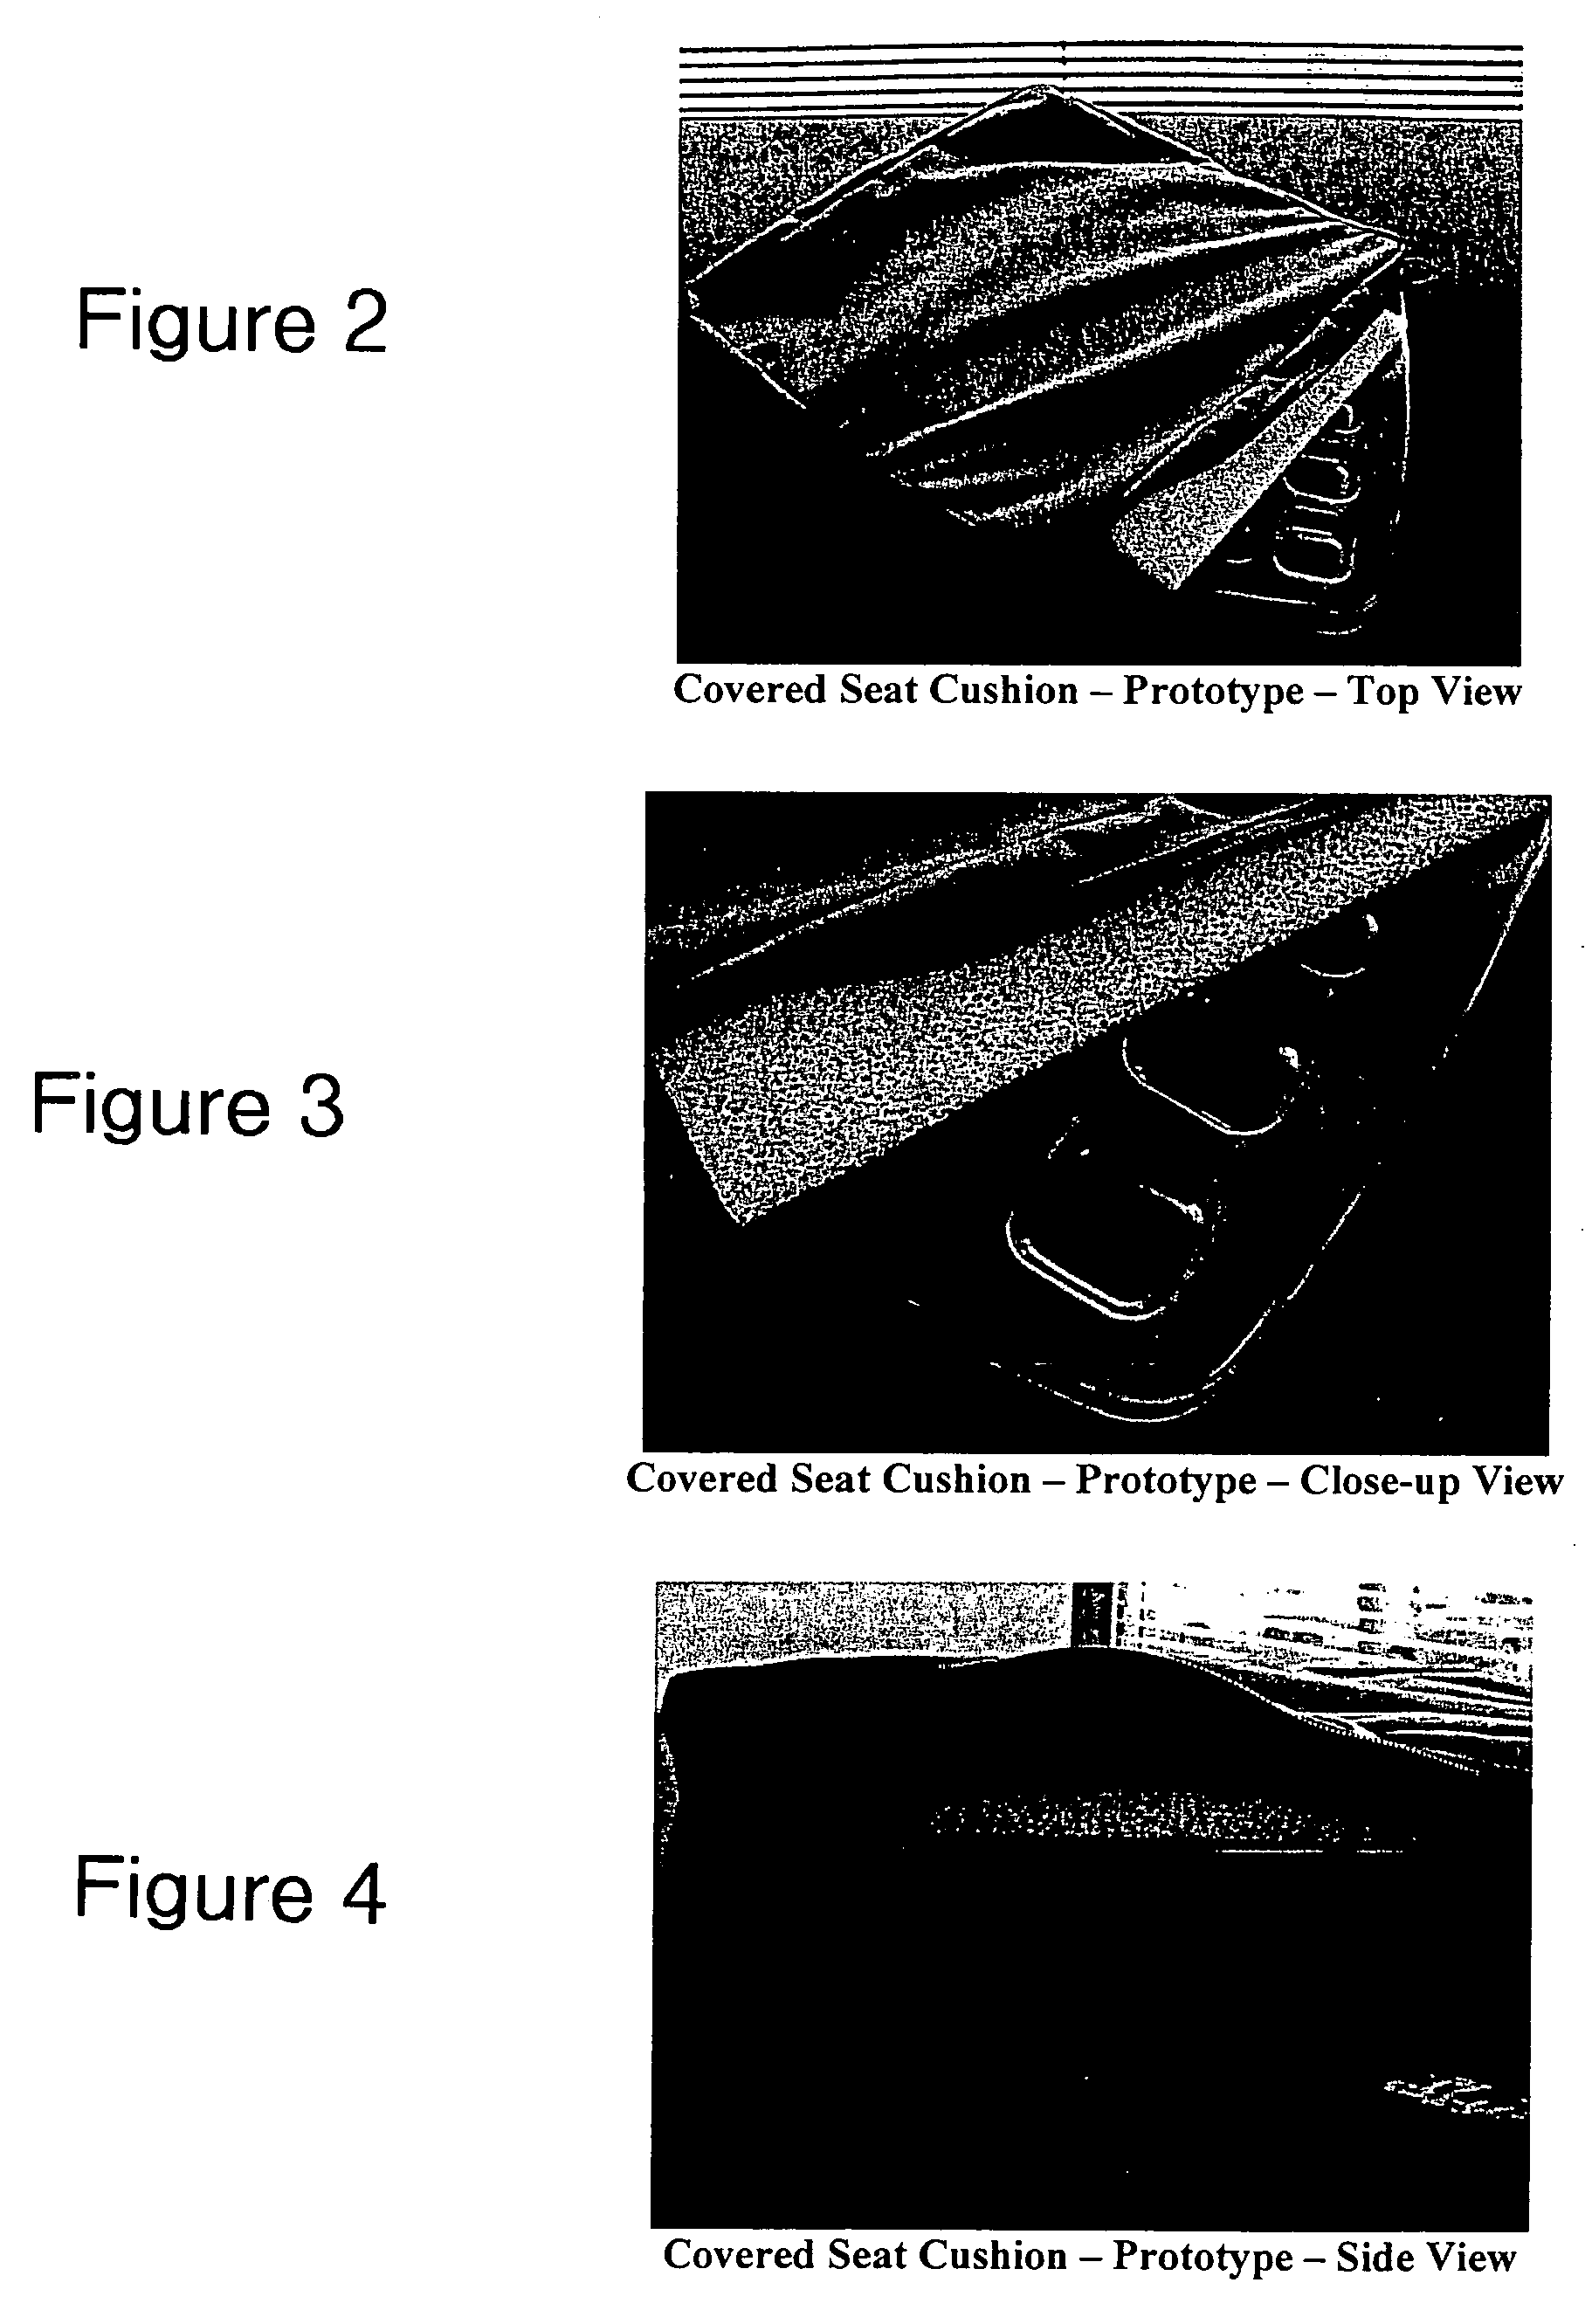 Cushioning system with parallel sheets having opposing indentions for linear deflection under load